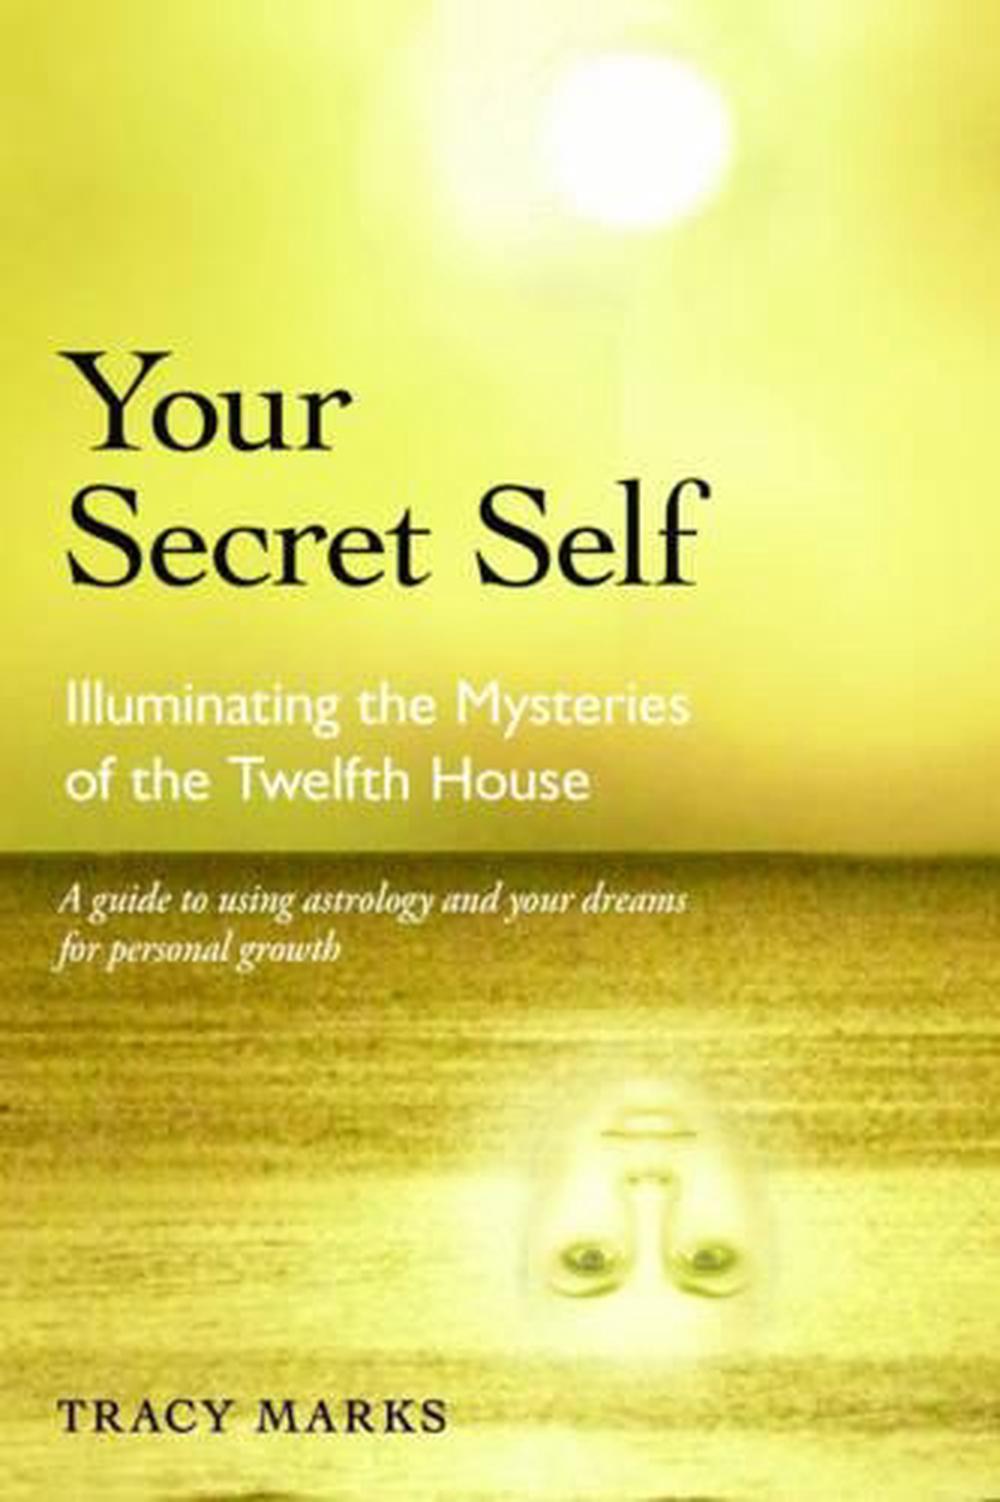 Your Secret Self Illuminating the Mysteries of the Twelfth House by